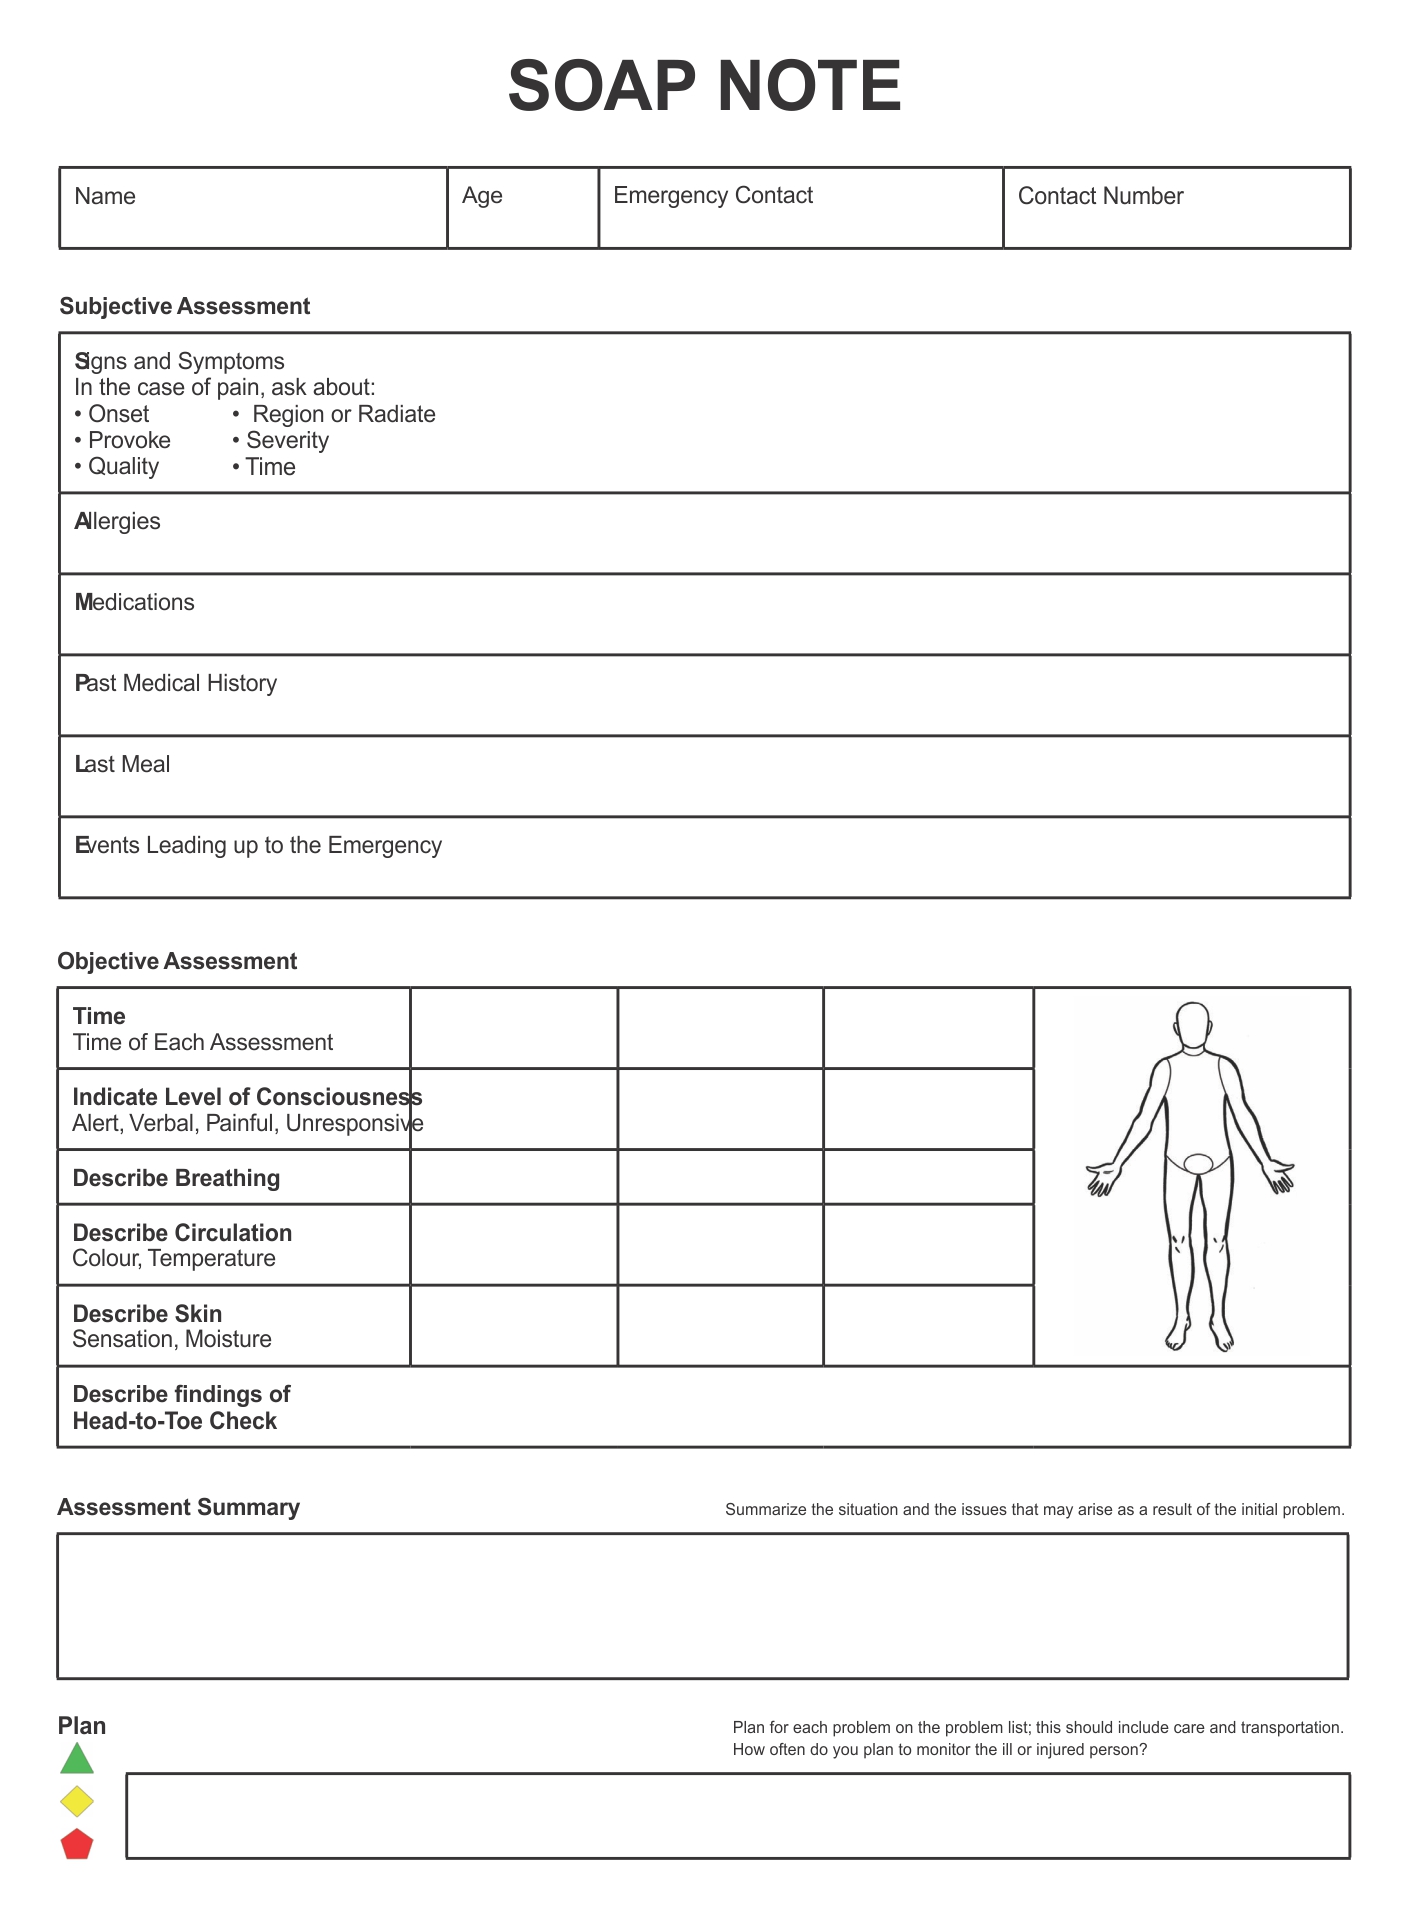 21 Best Printable Chiropractic Forms Soap Note - printablee.com In Free Soap Notes For Massage Therapy Templates